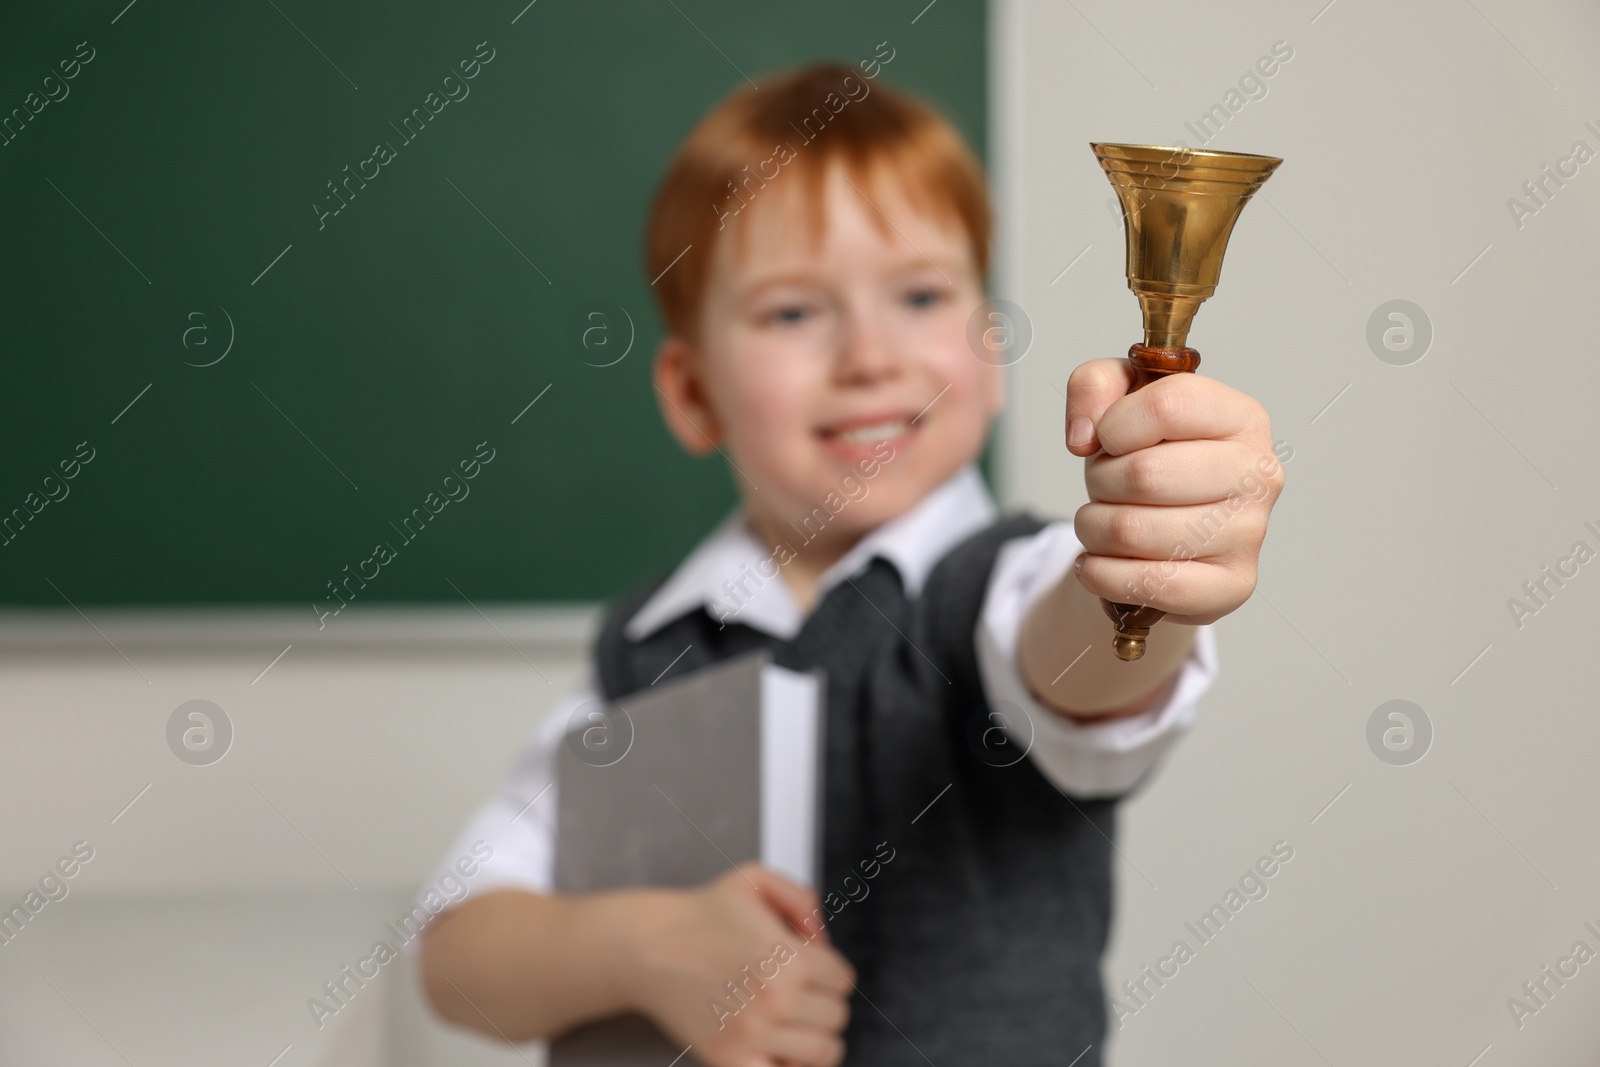 Photo of Cute little boy ringing school bell in classroom, focus on hand